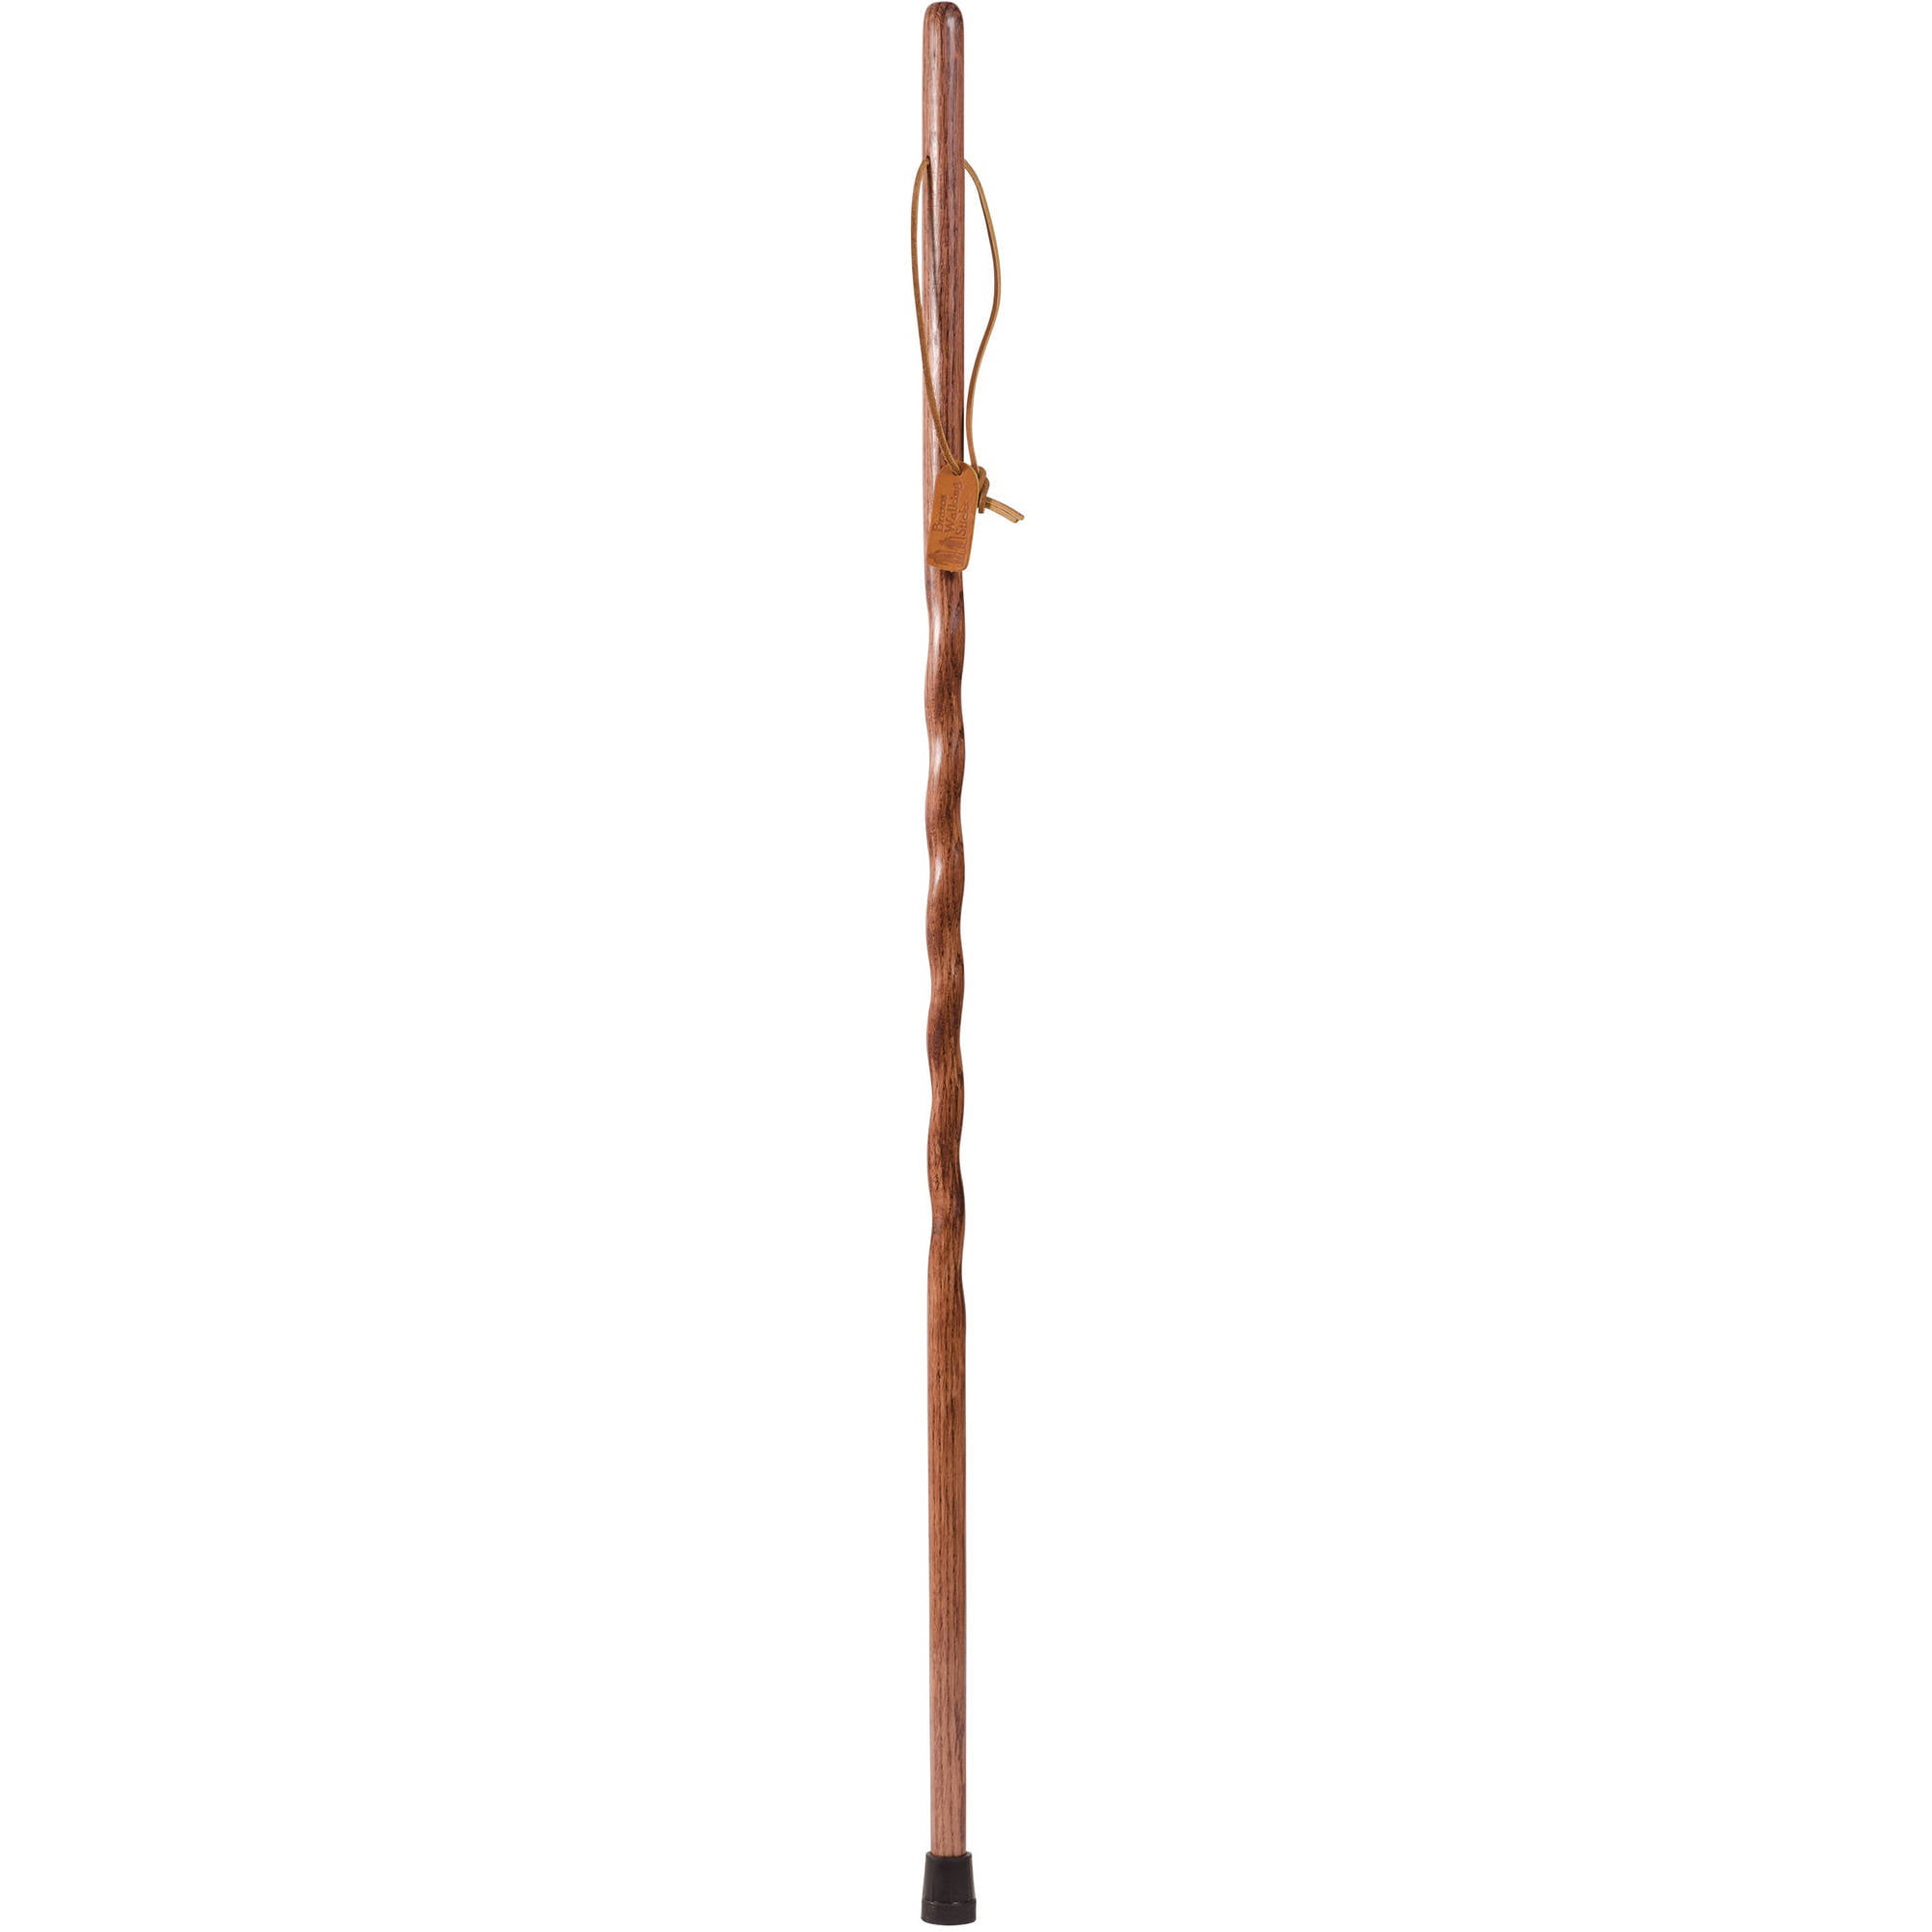 Brazos Rustic Wood Walking Stick, Bamboo, Traditional Style Handle, for Men  & Women, Made in The USA, Tan, 58